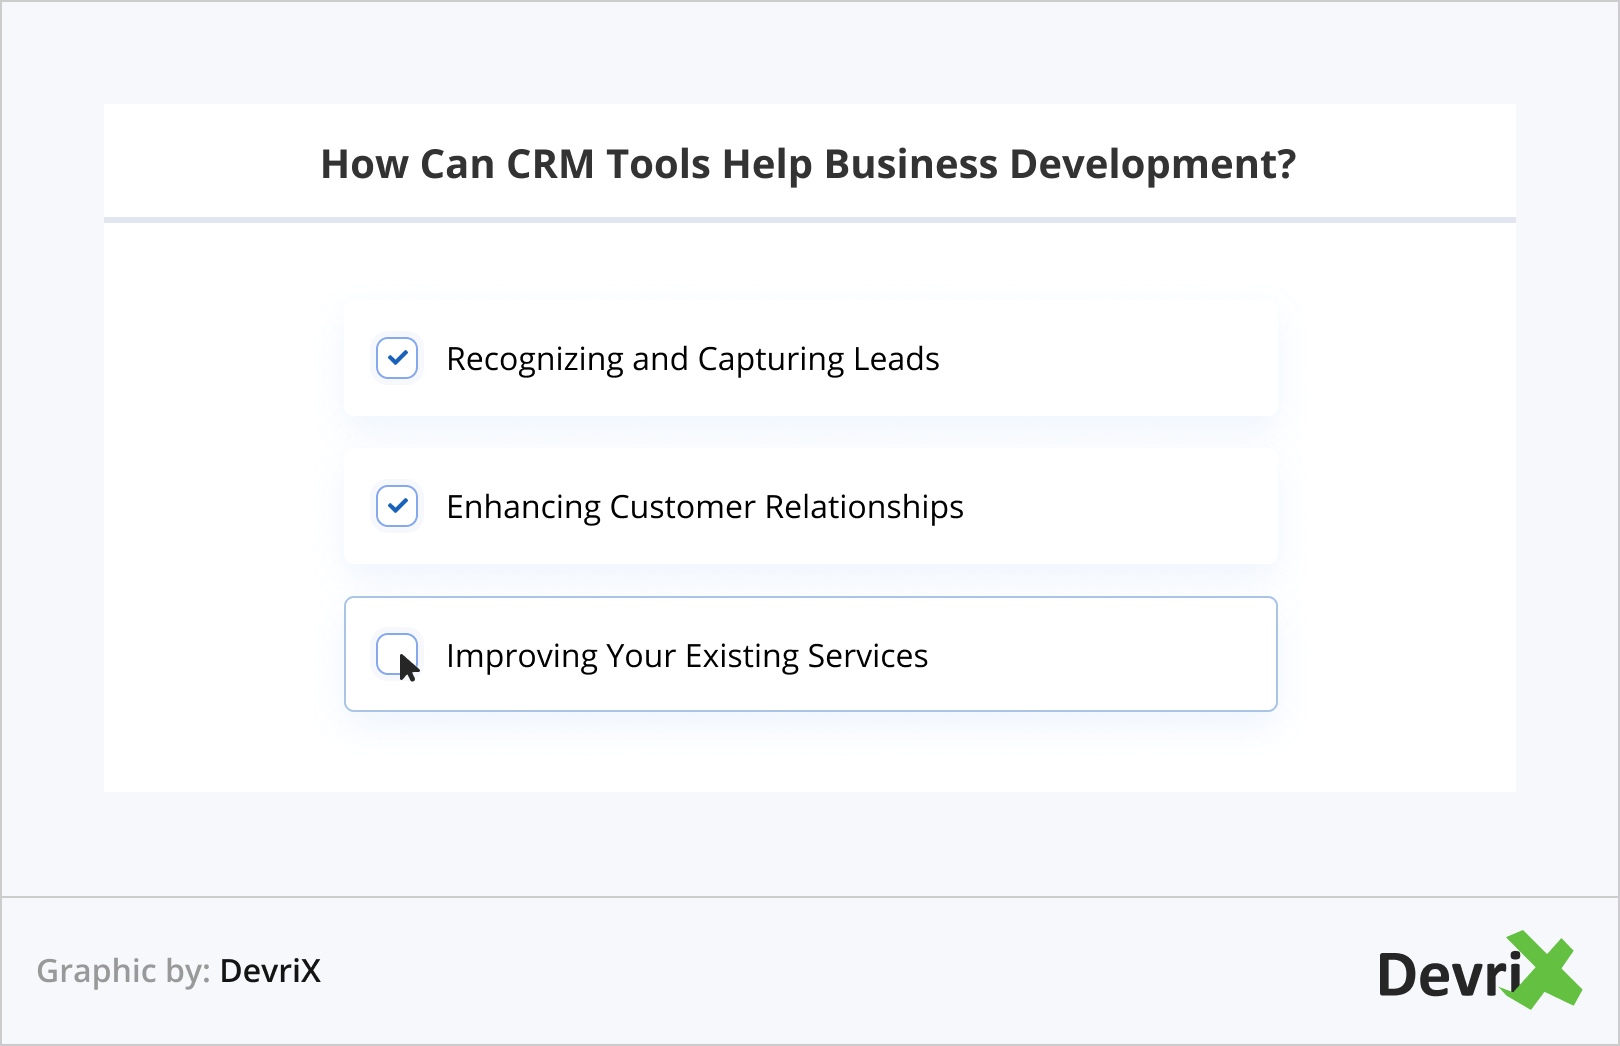 How Can CRM Tools Help Business Development